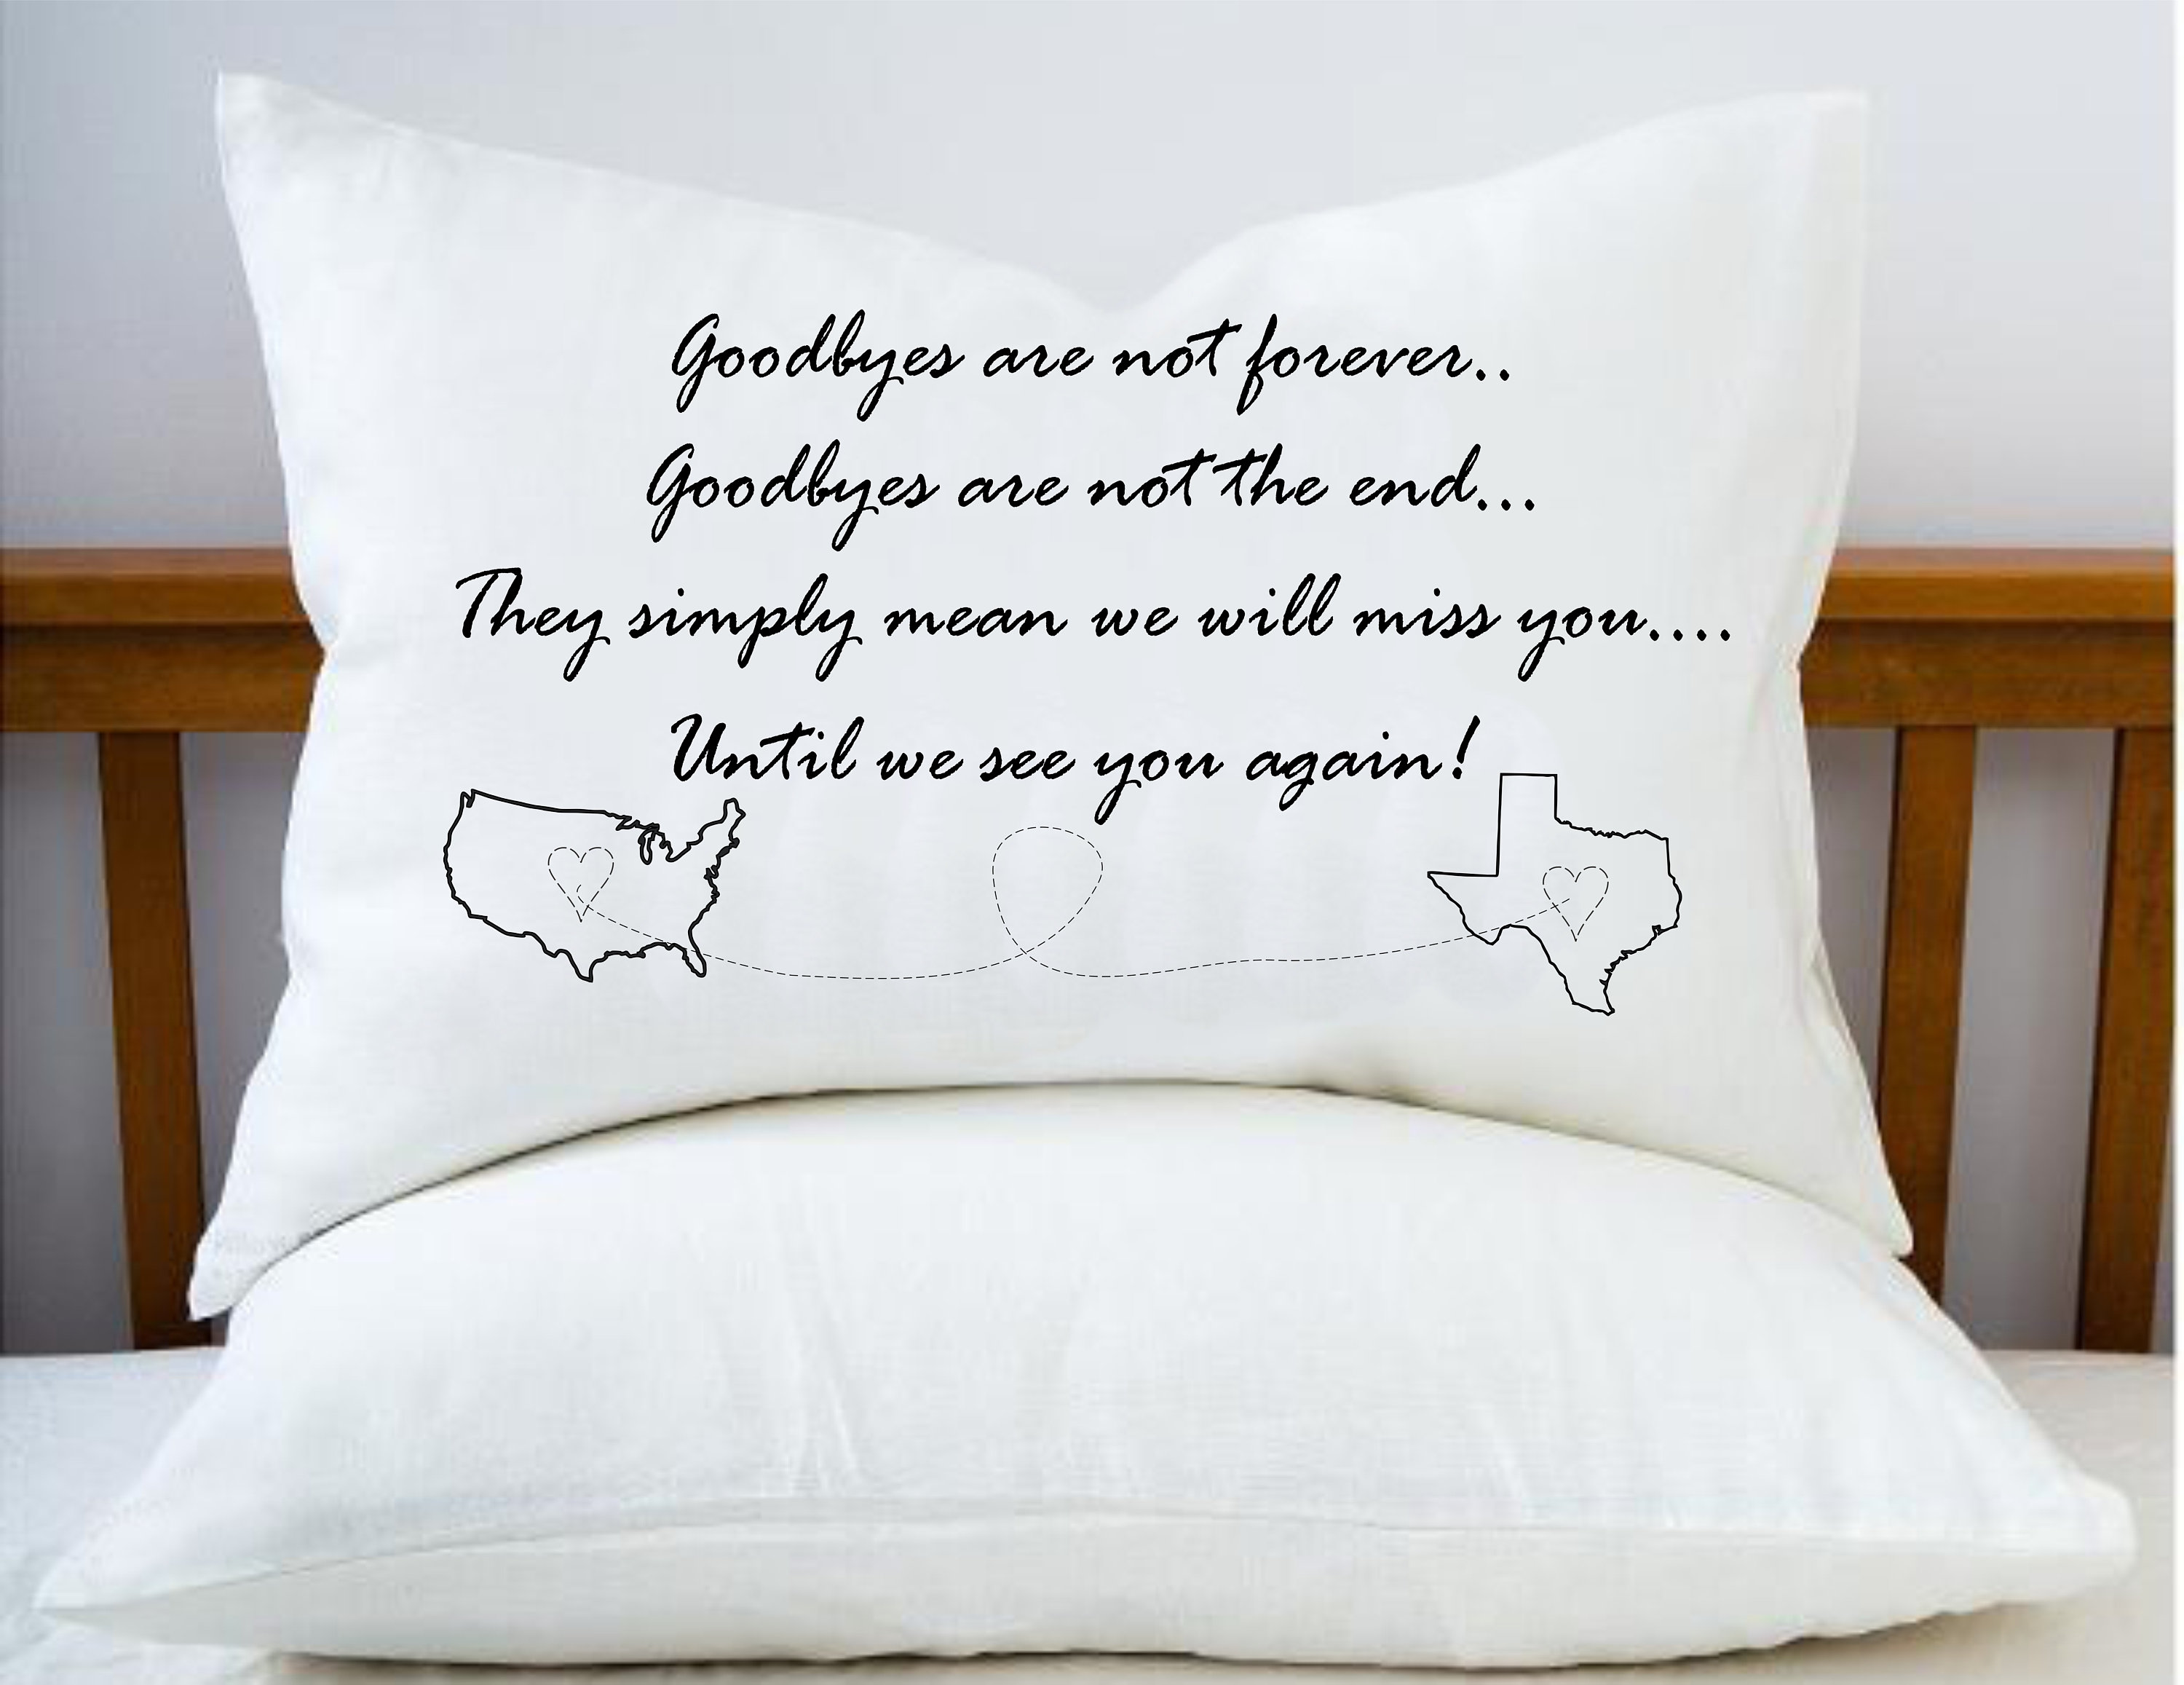 Goodbye pillow missing you pillow moving away distance gift Best friend gift Distant relationship pillow Goodbyes are not forever  pillow